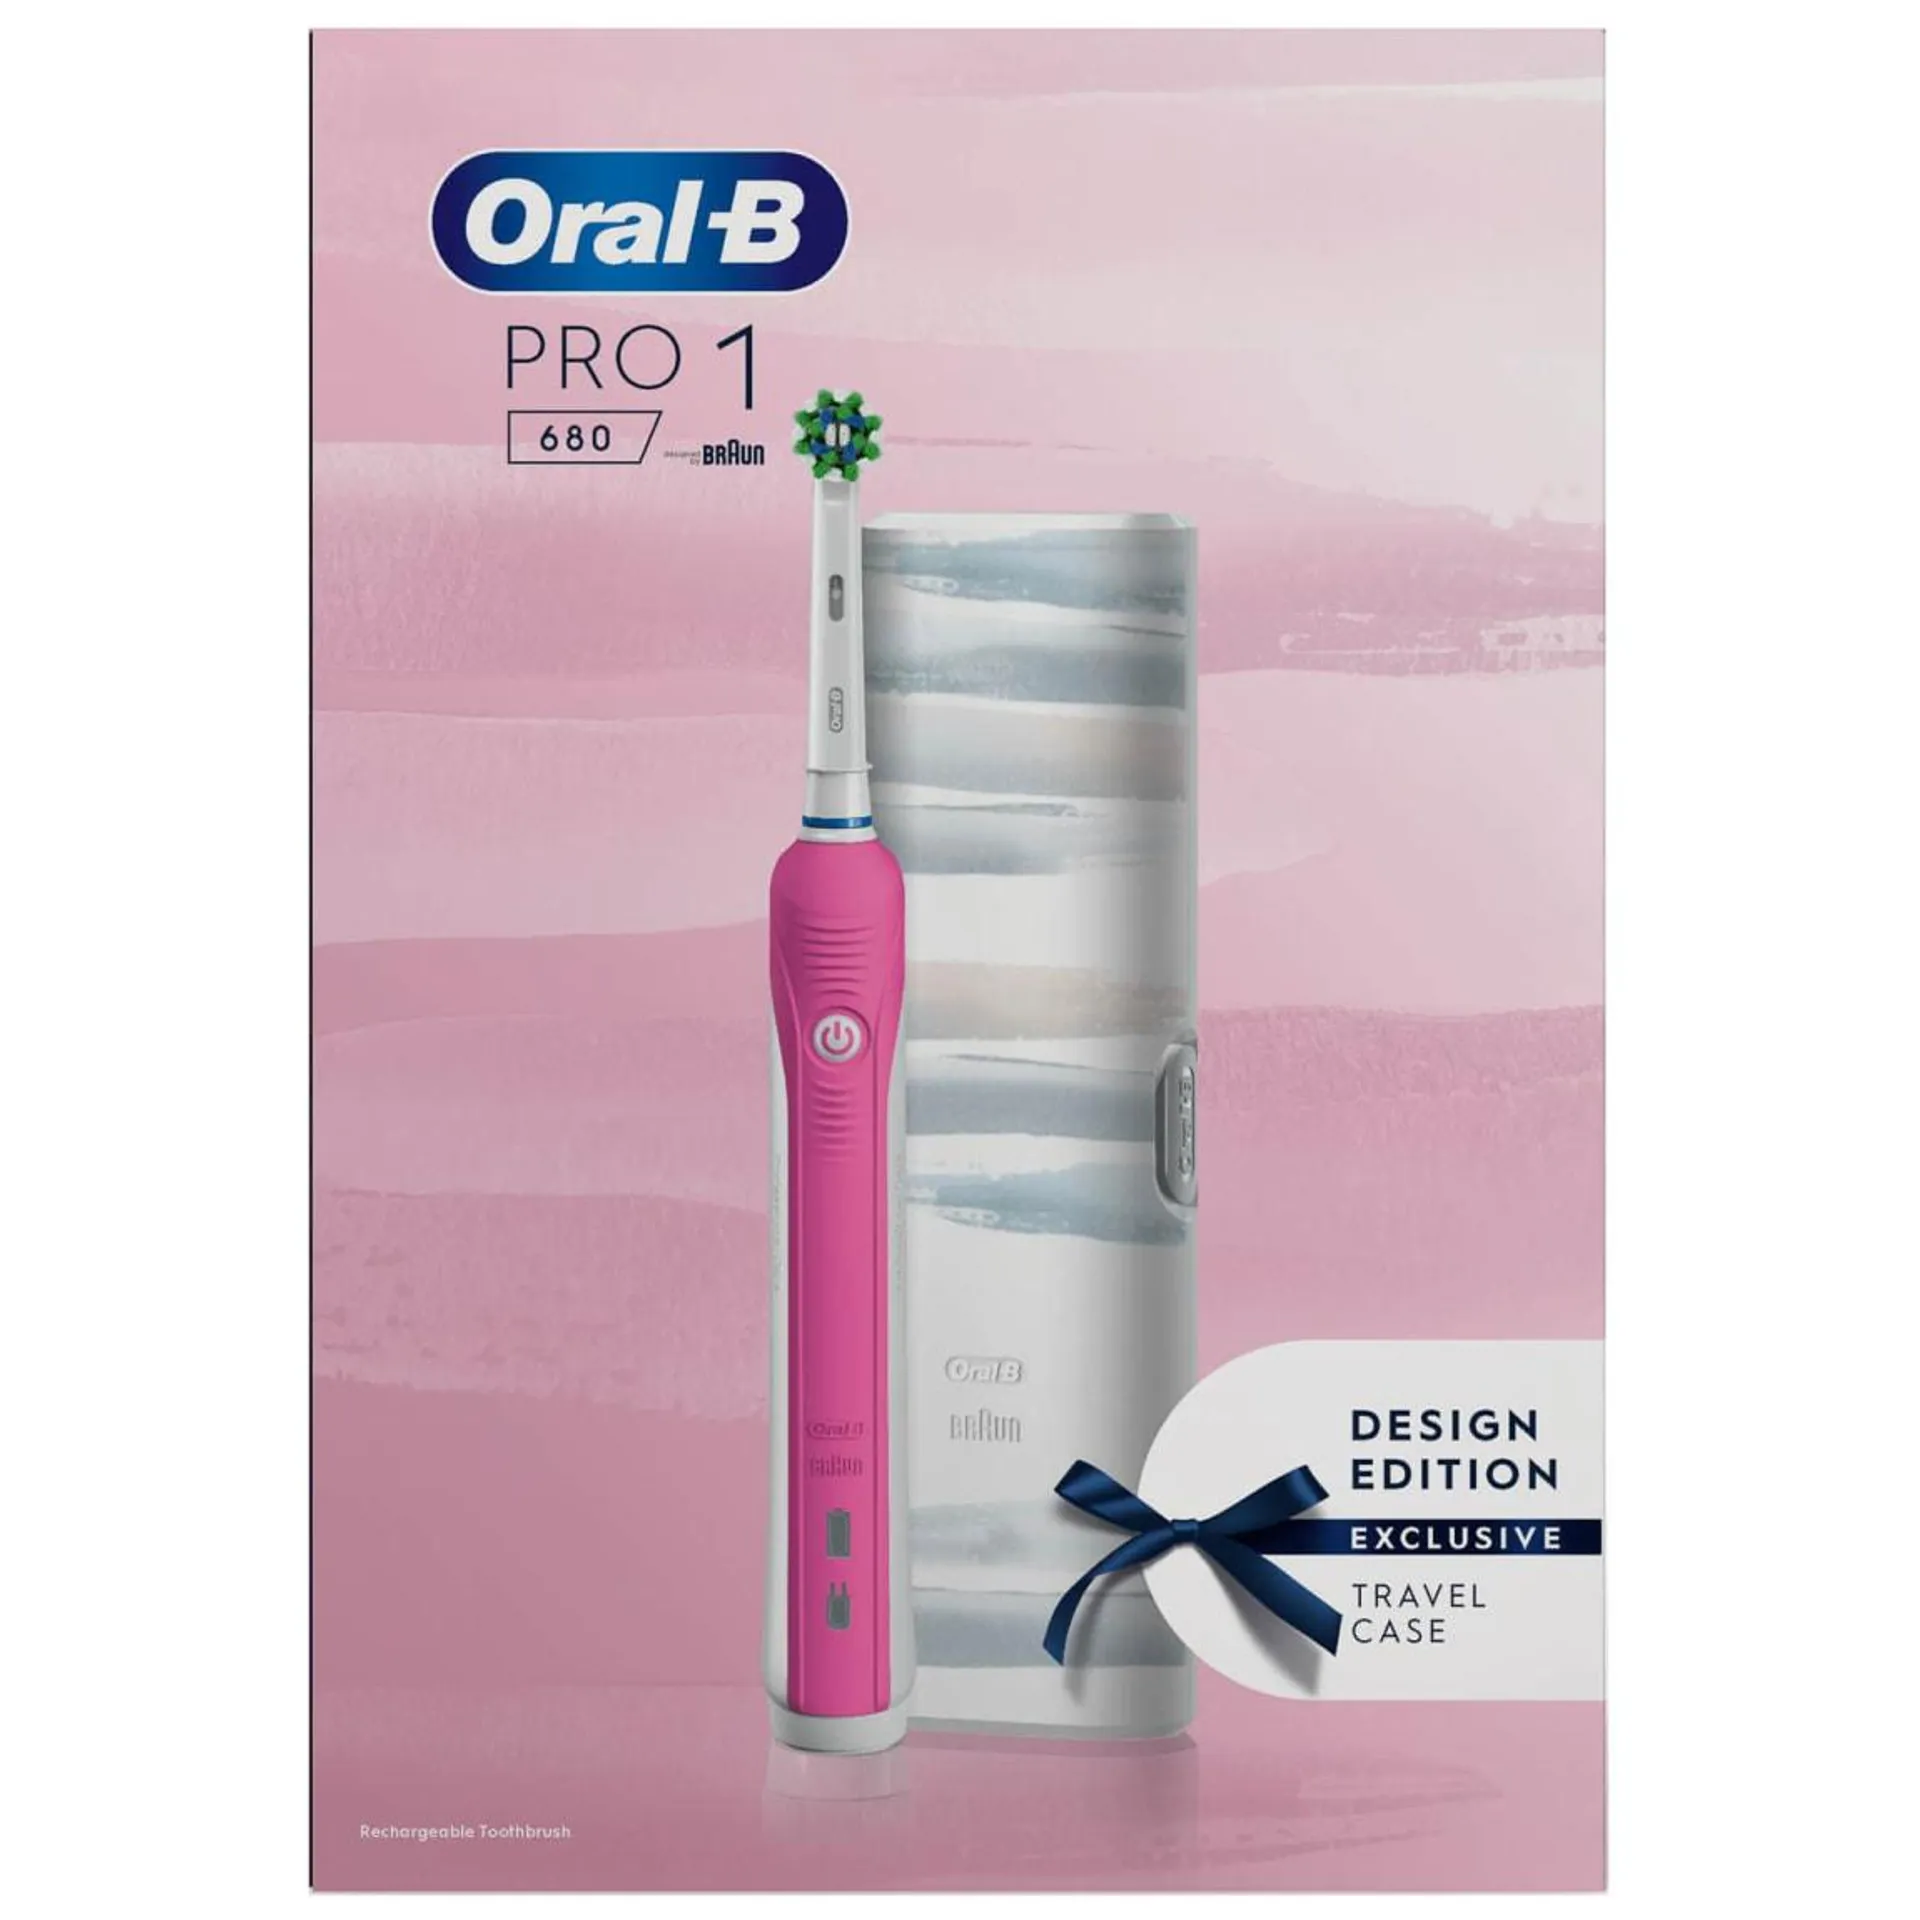 Oral-B Pro 1 680 Rechargeable Toothbrush - Pink